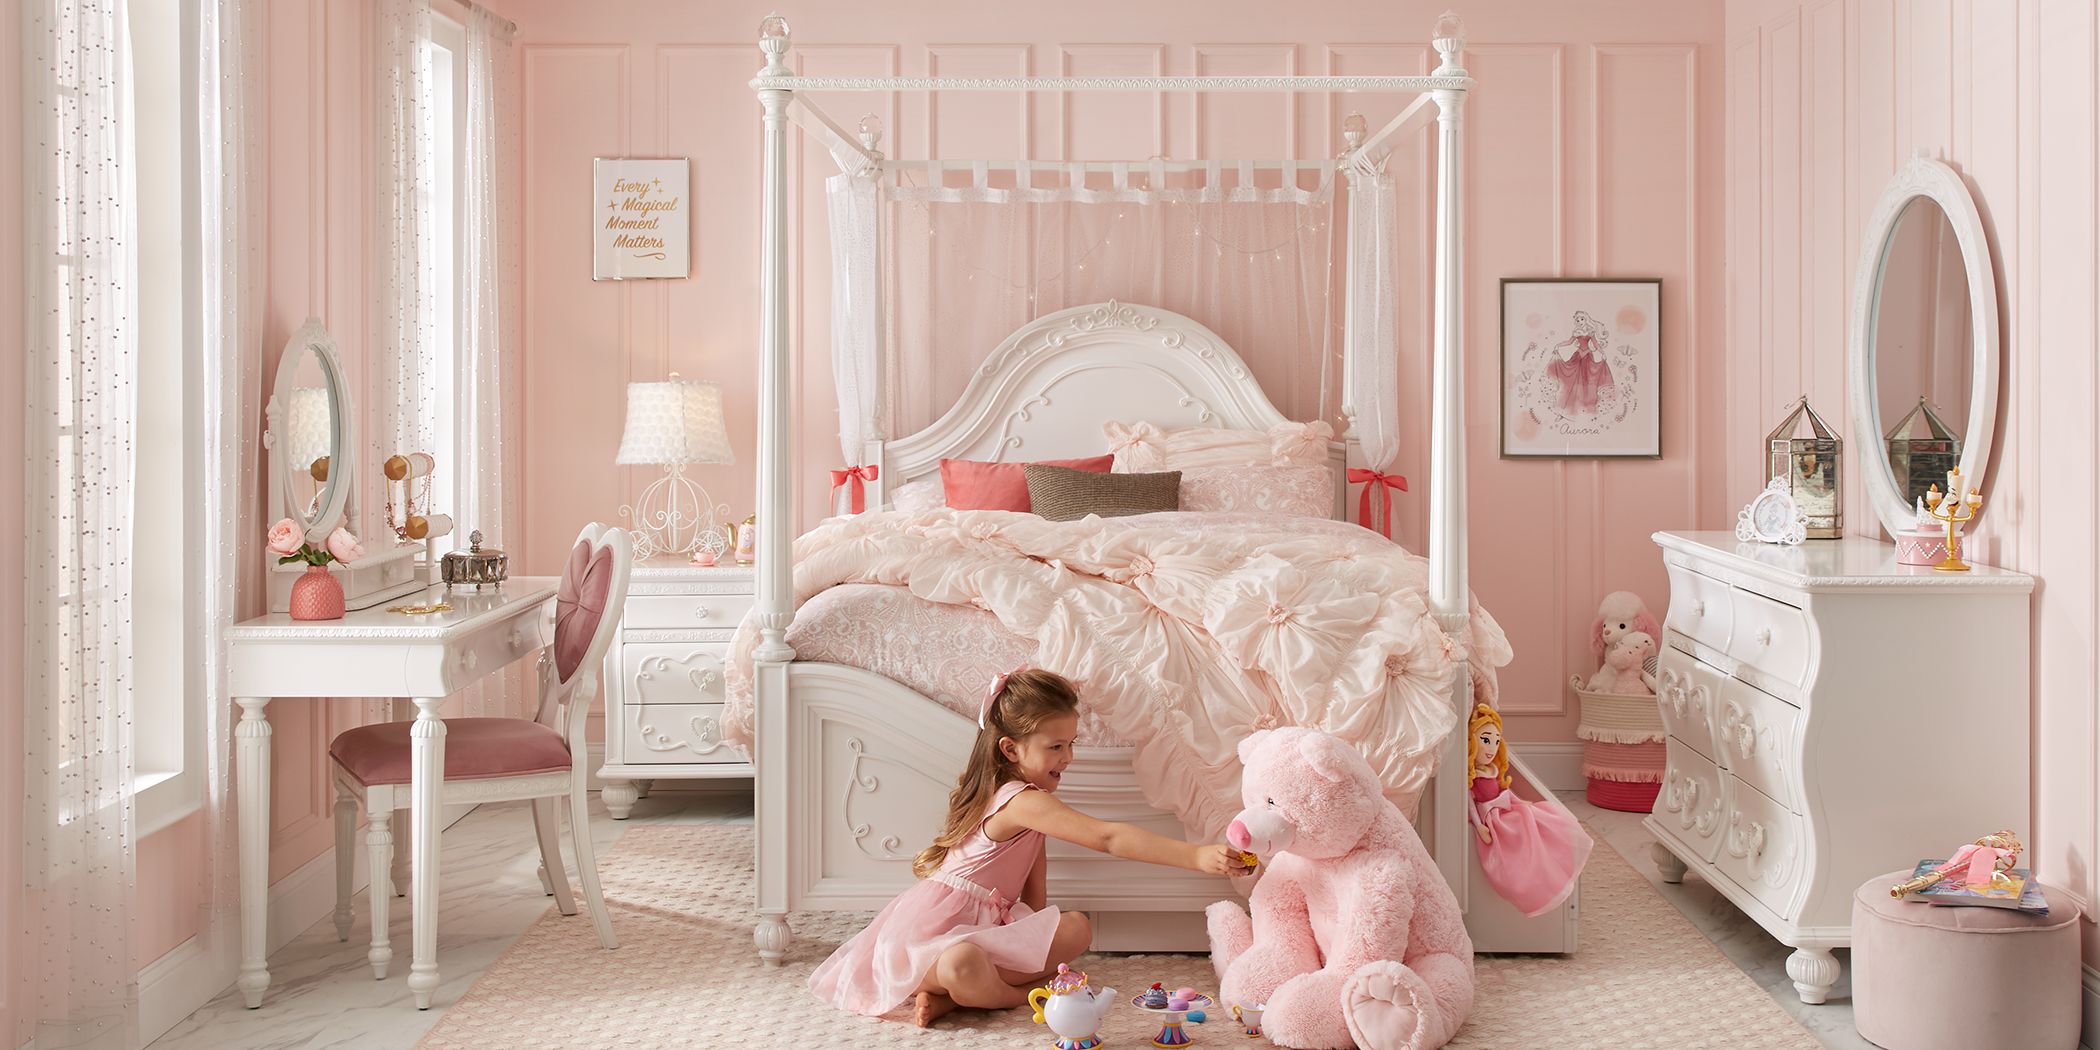 princess bed for 4 year old